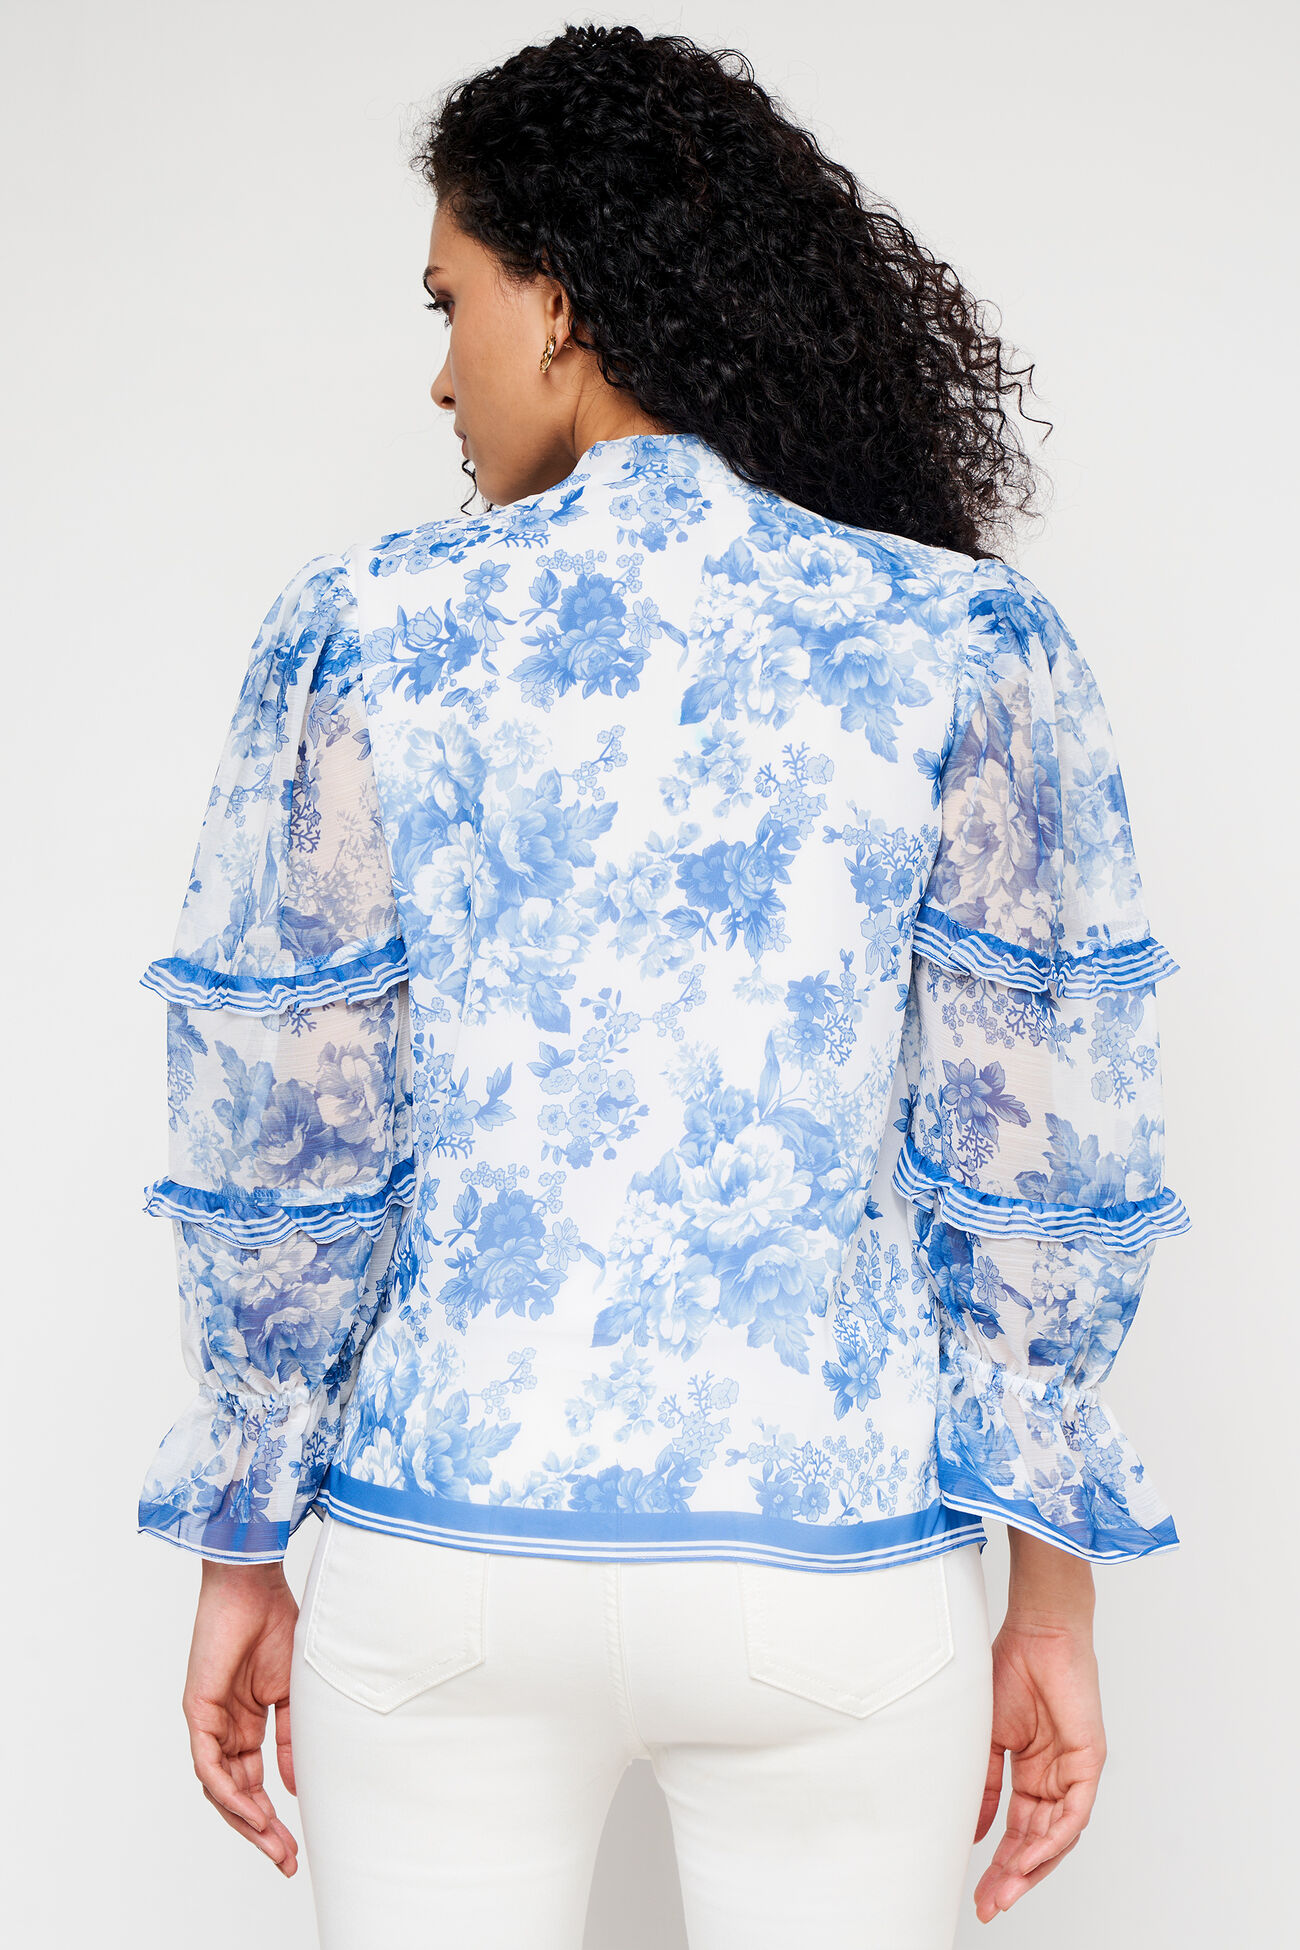 Blue and White Floral Casual Top, Blue, image 4